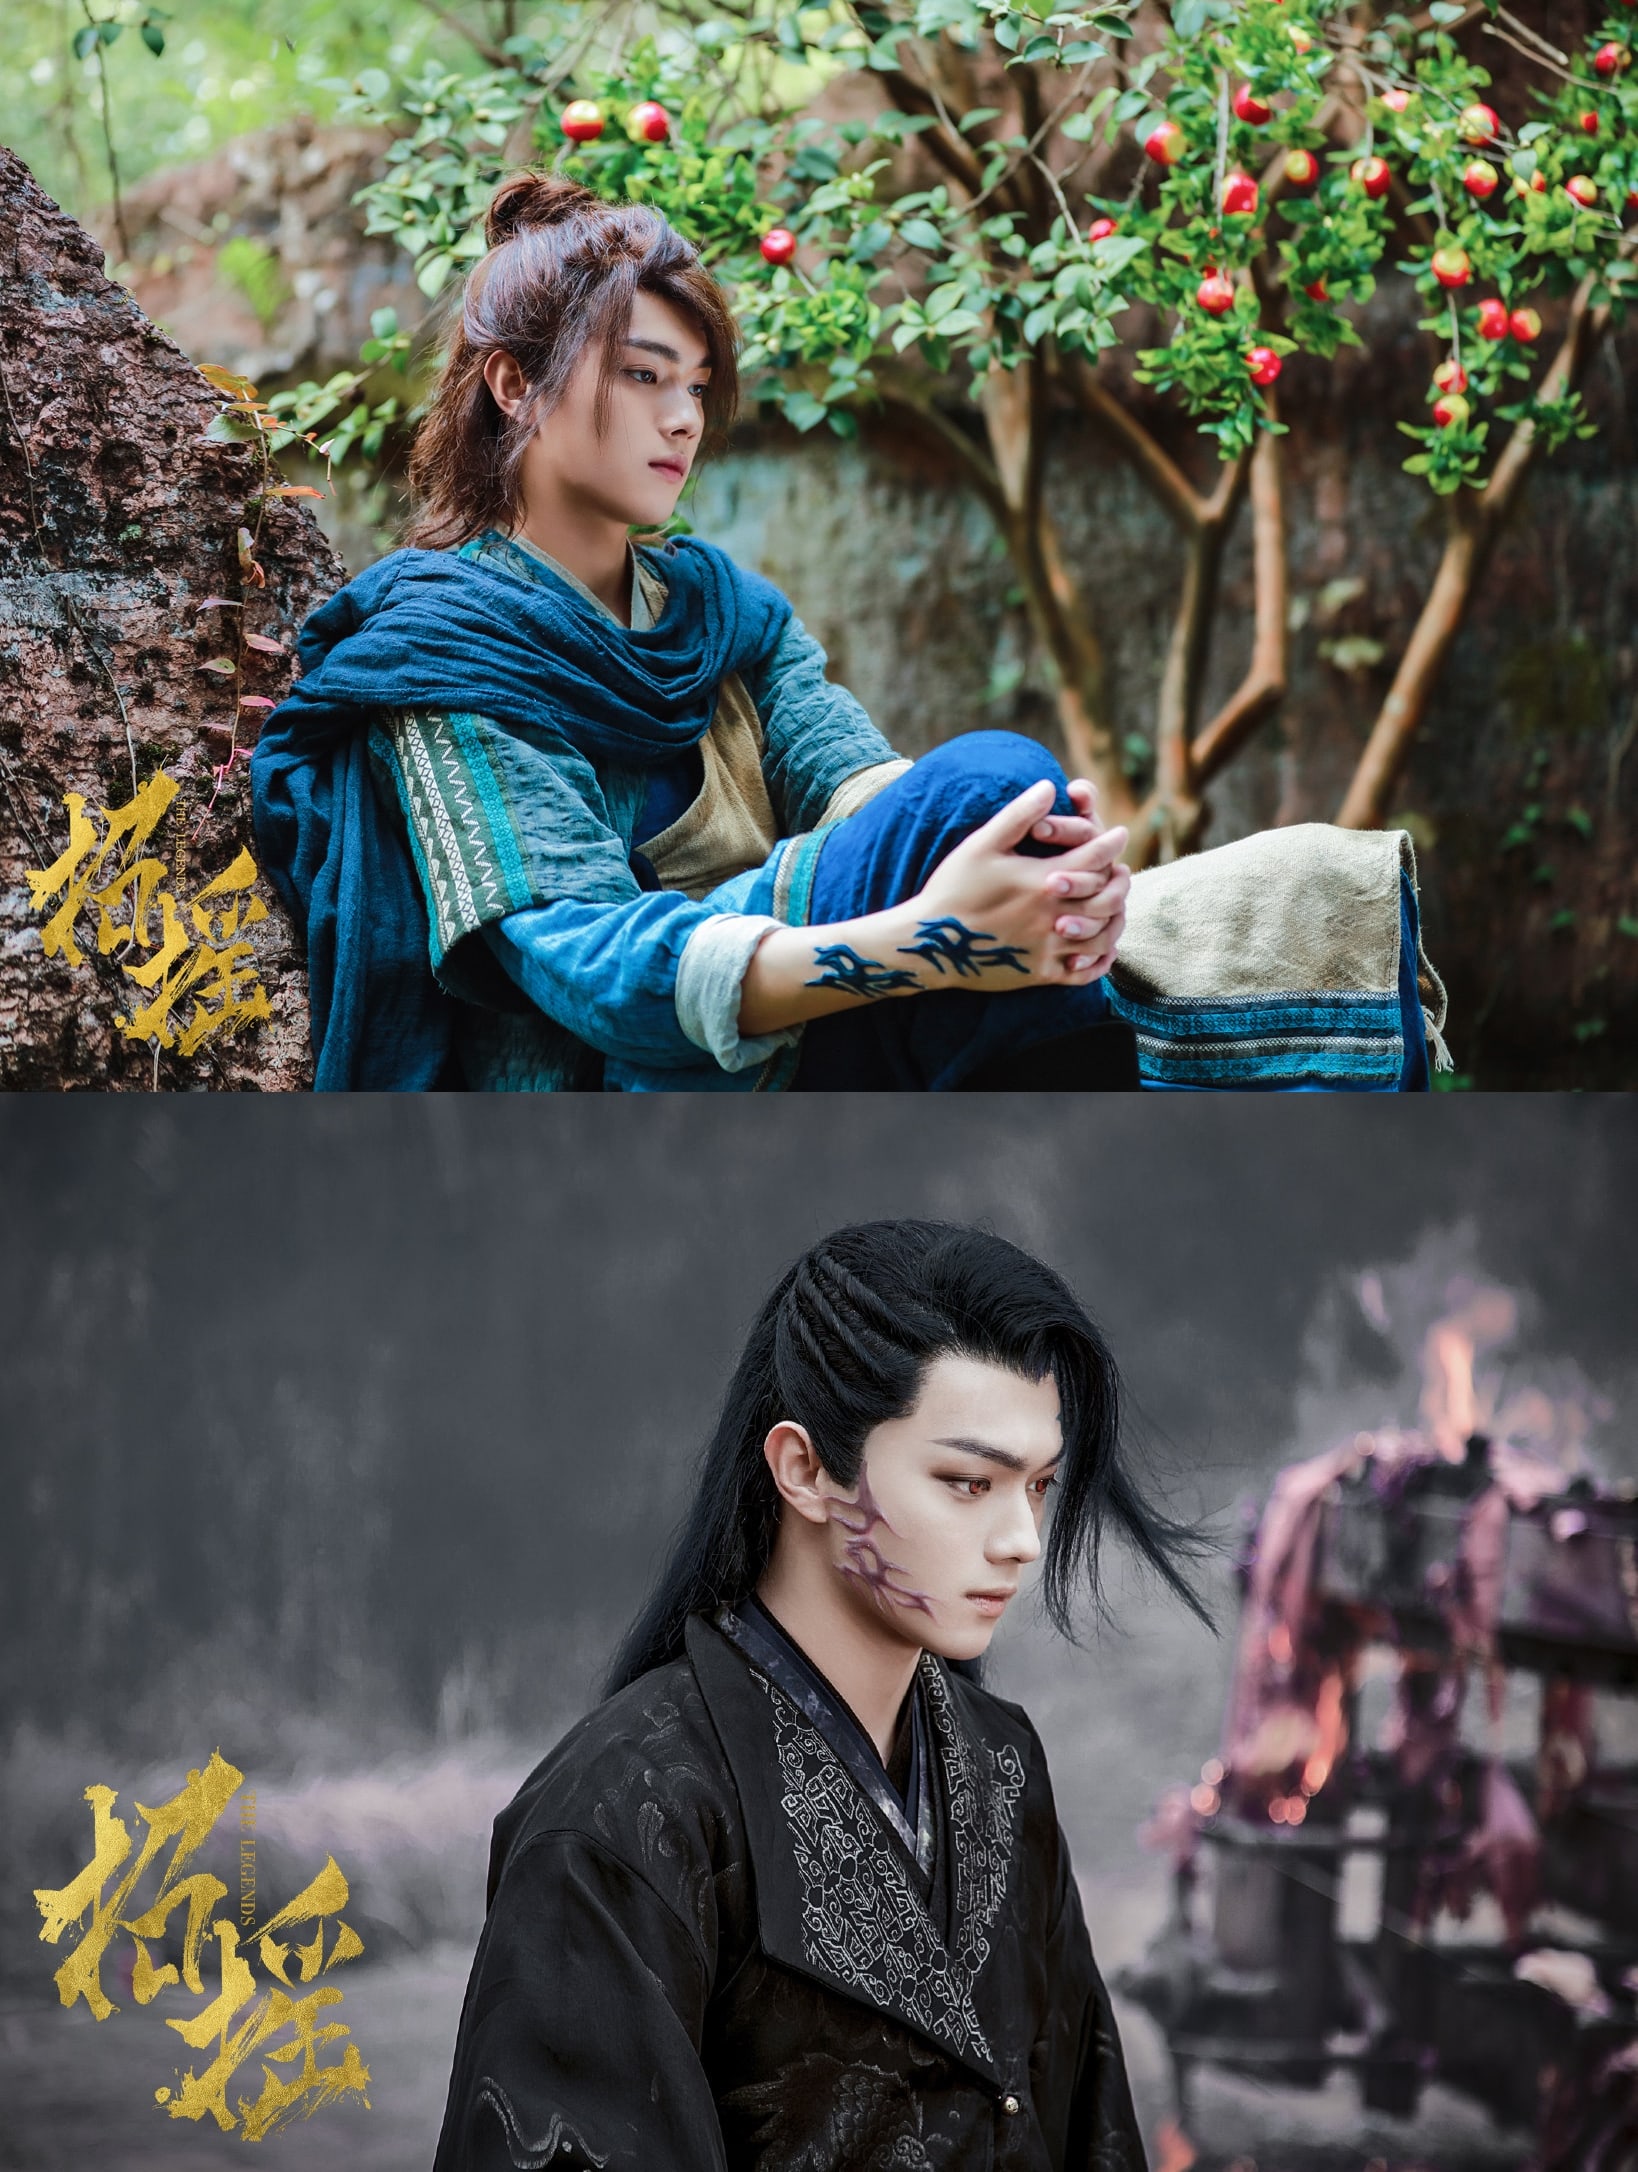 A Heroine's Vow Of Revenge: 4 Reasons To Watch C Drama “The Legends”